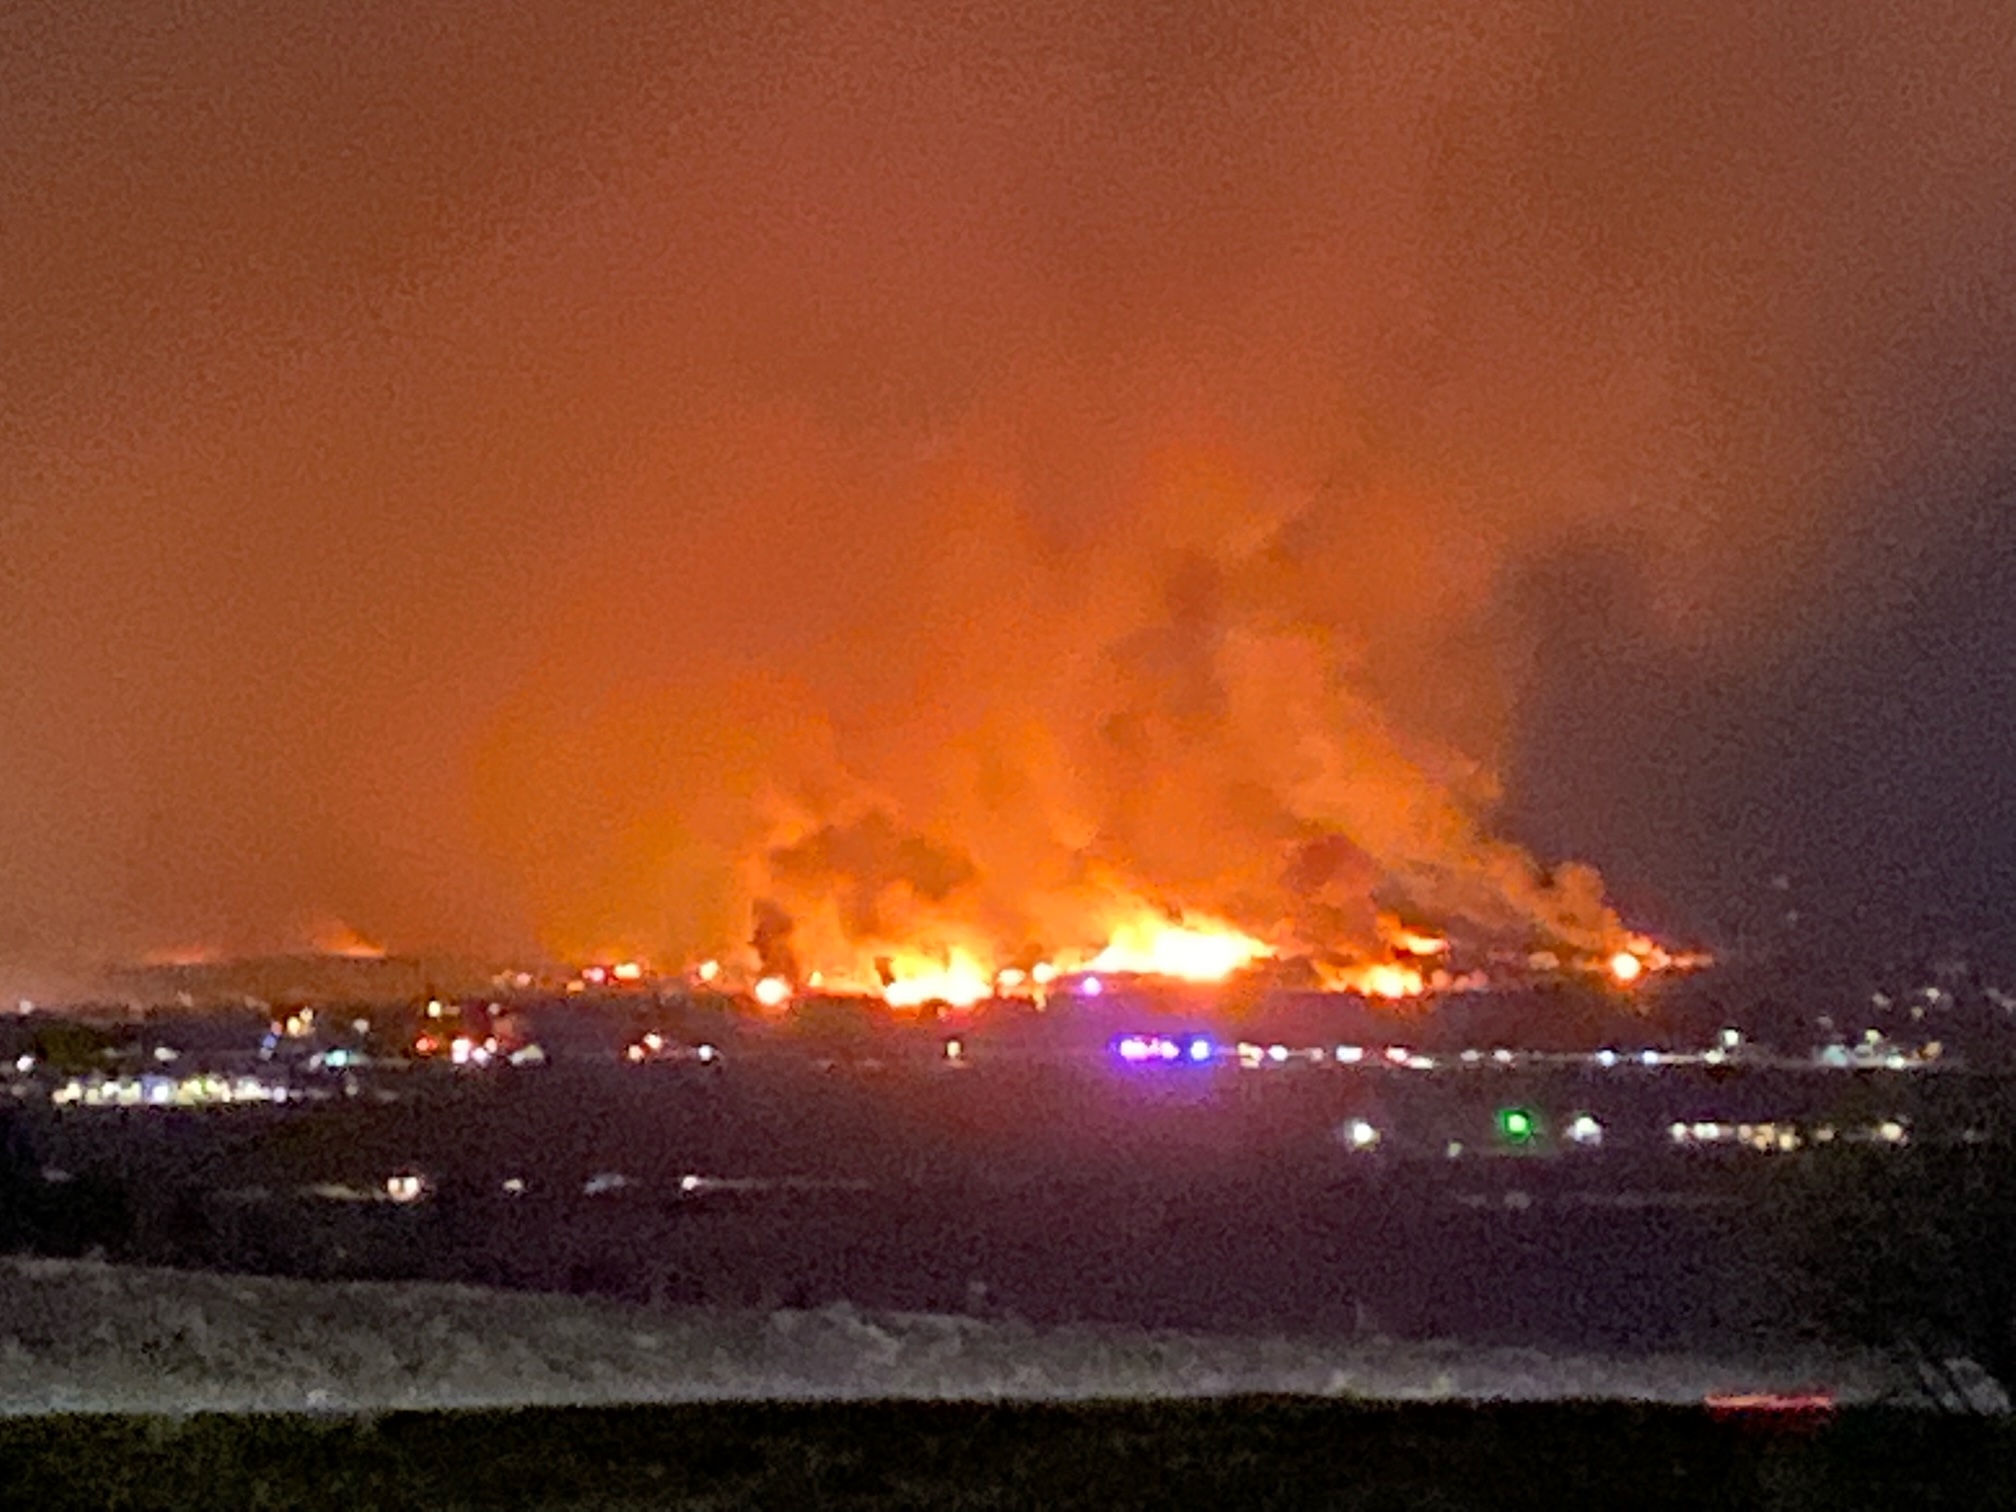 Image of Marshall Fire from Broomfield, CO